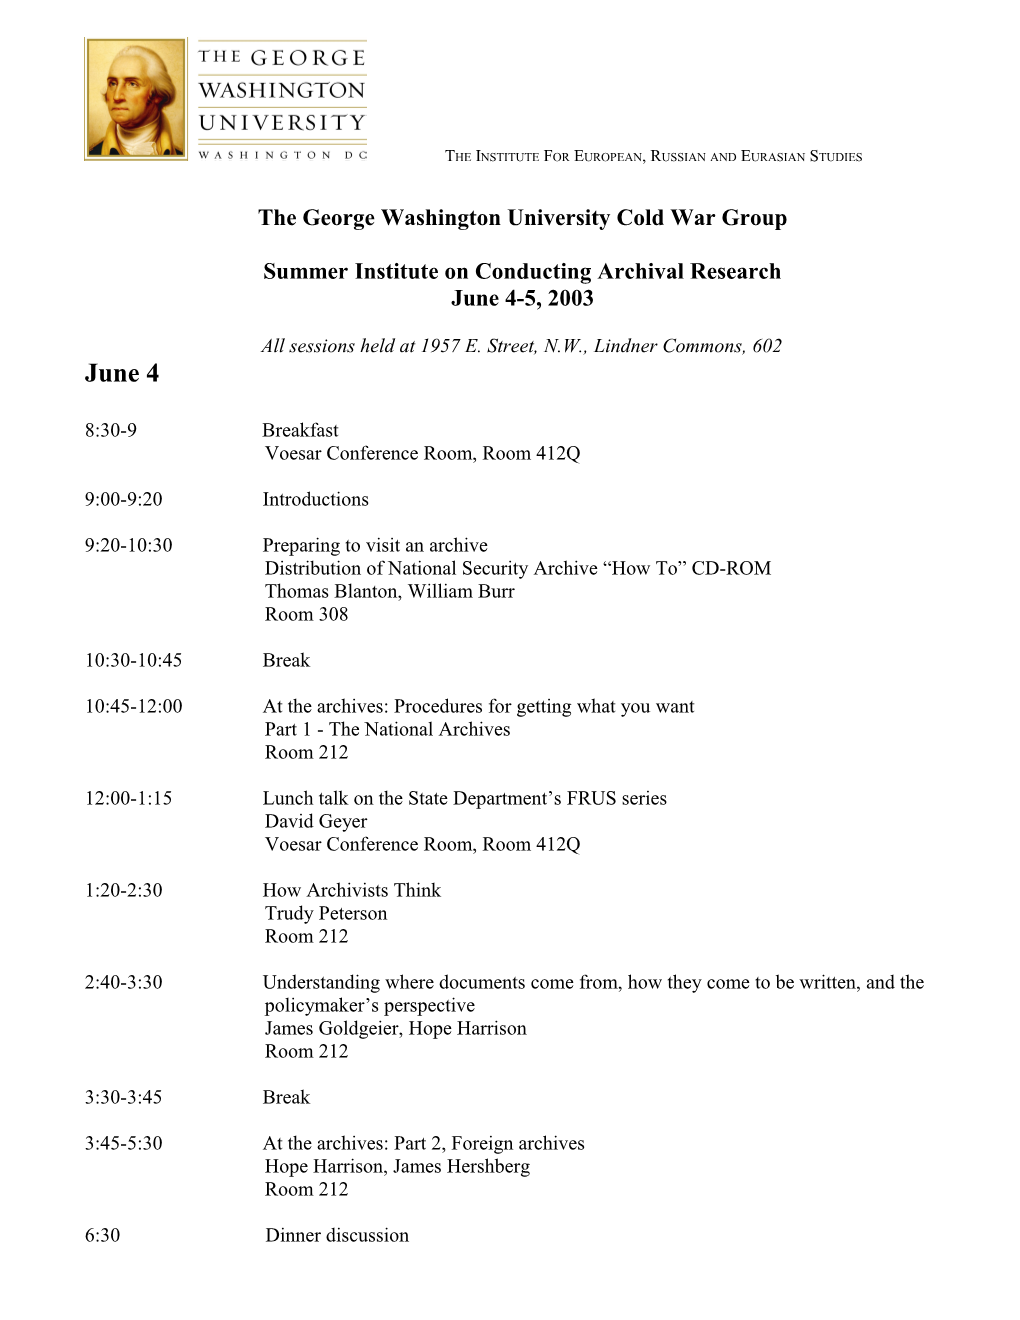 Second Annual GWU-UCSB Graduate Student Conference on the Cold War